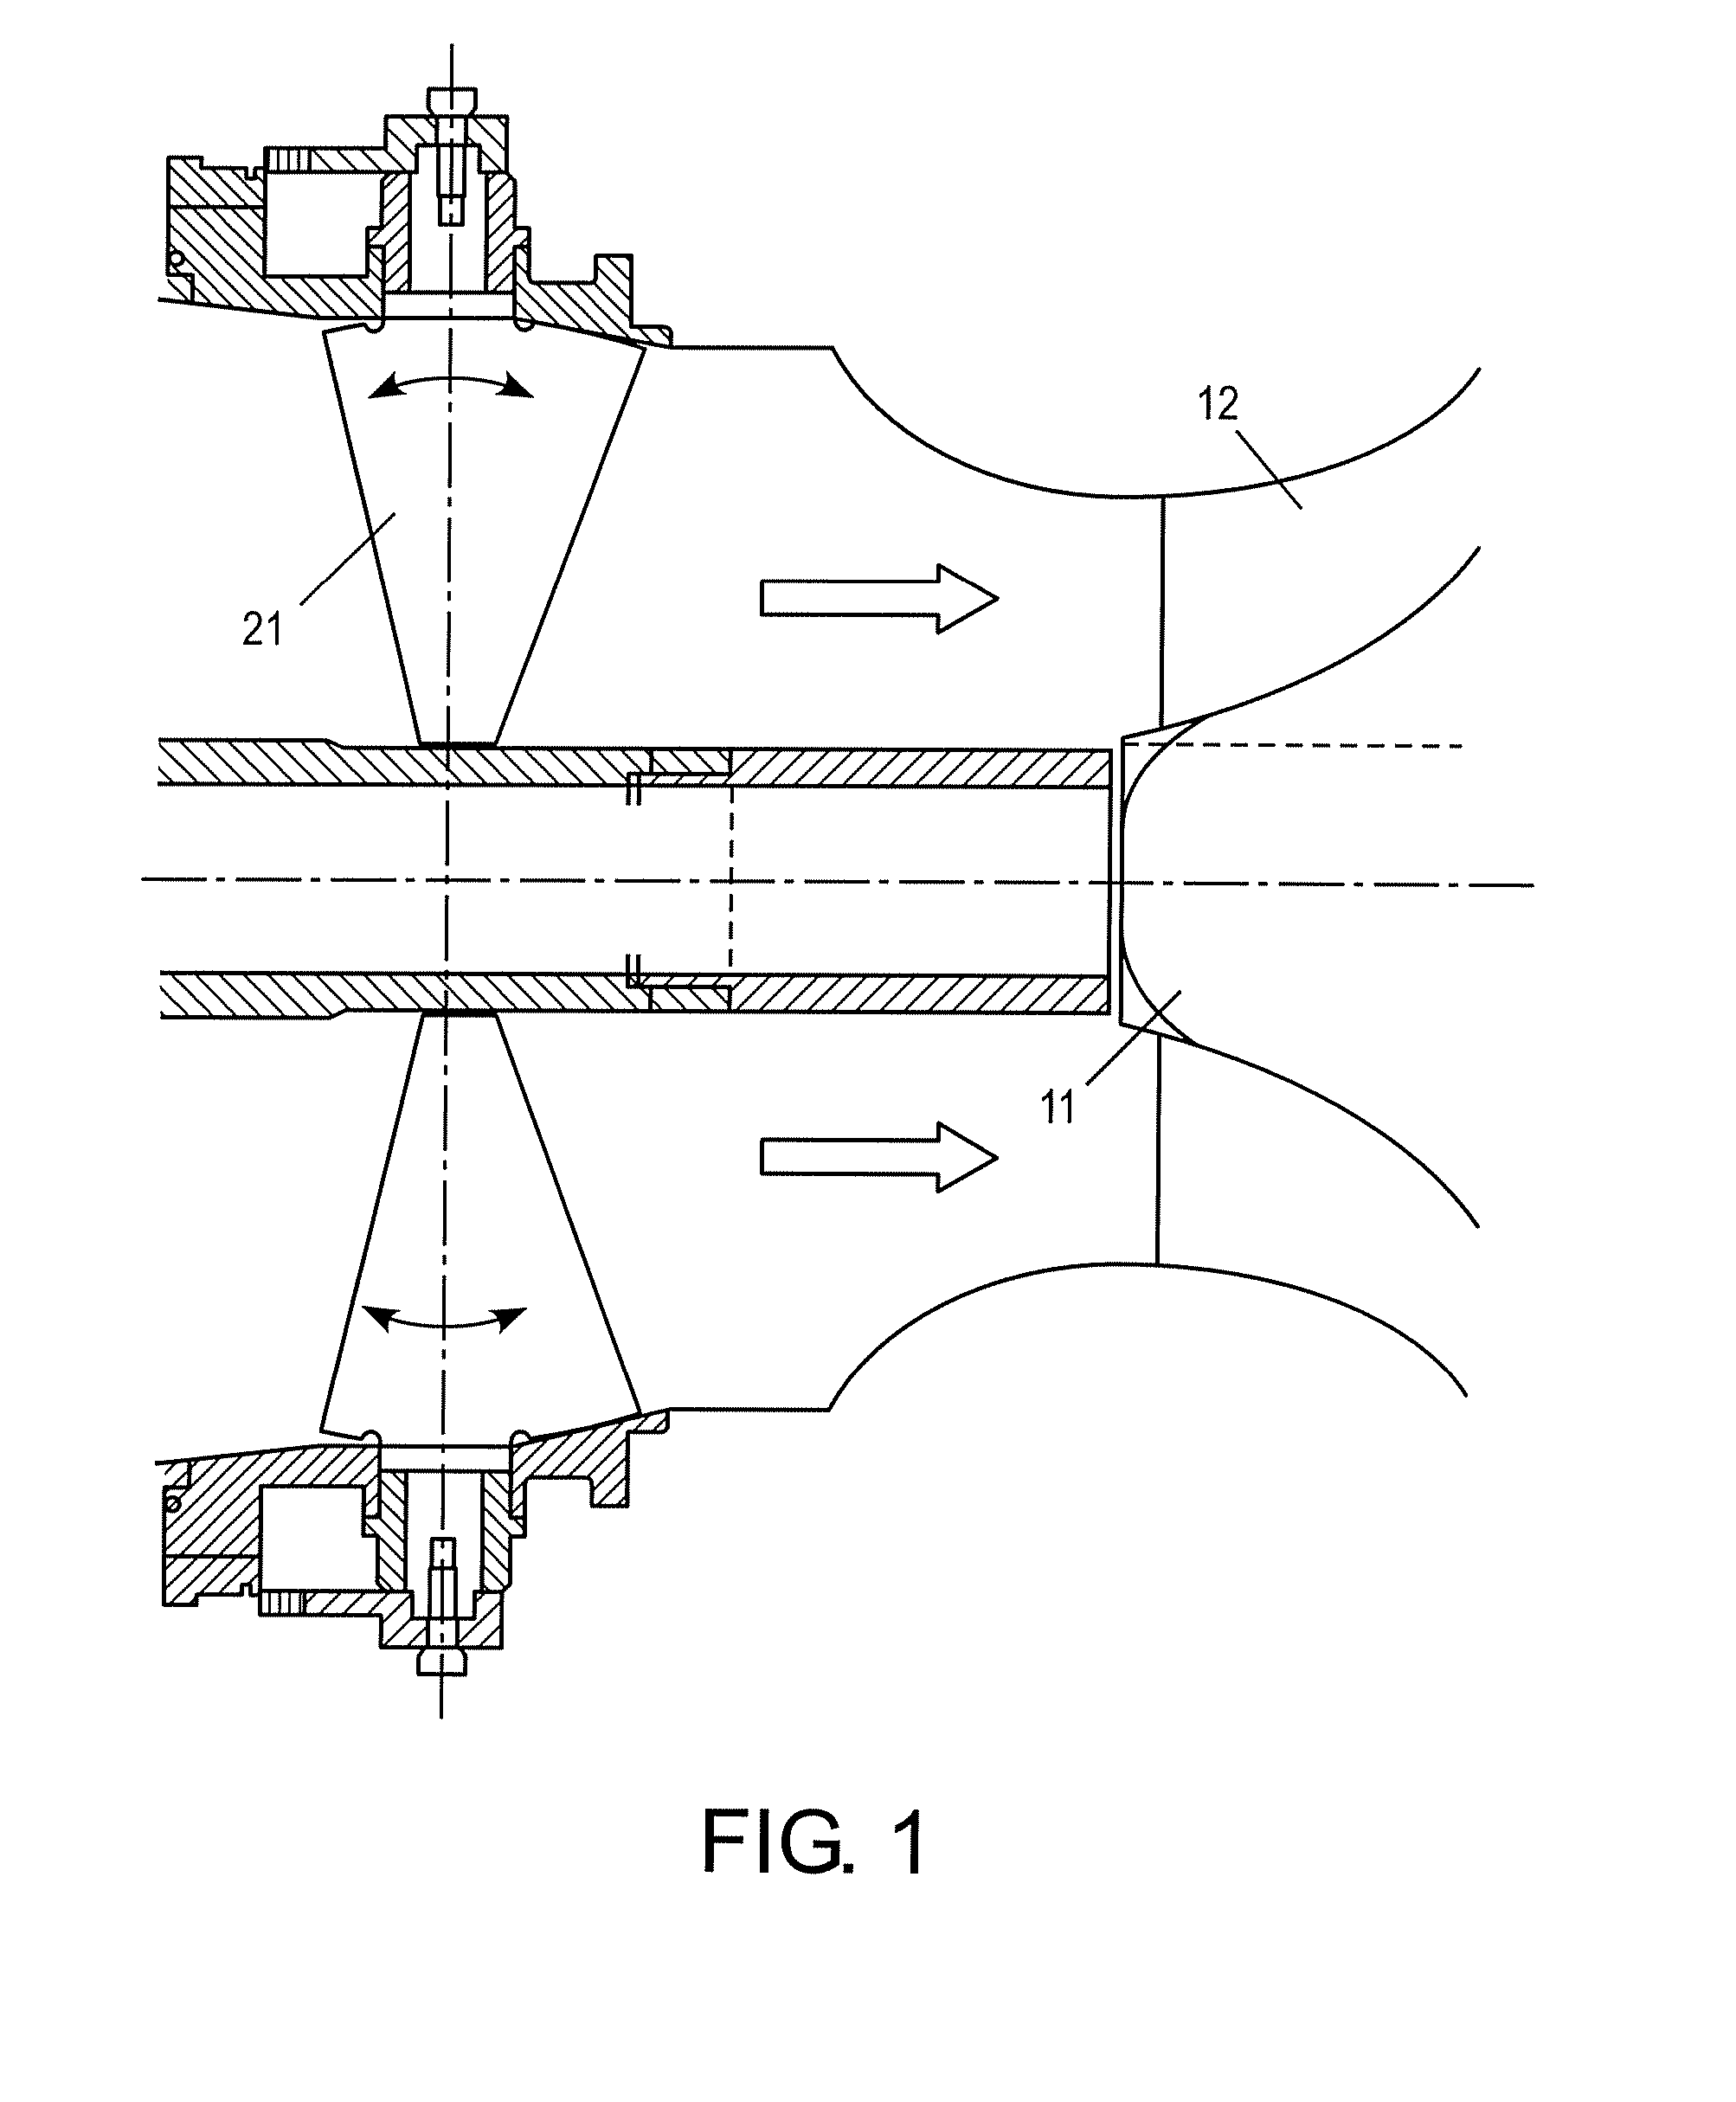 Supercharging control for an internal combustion engine